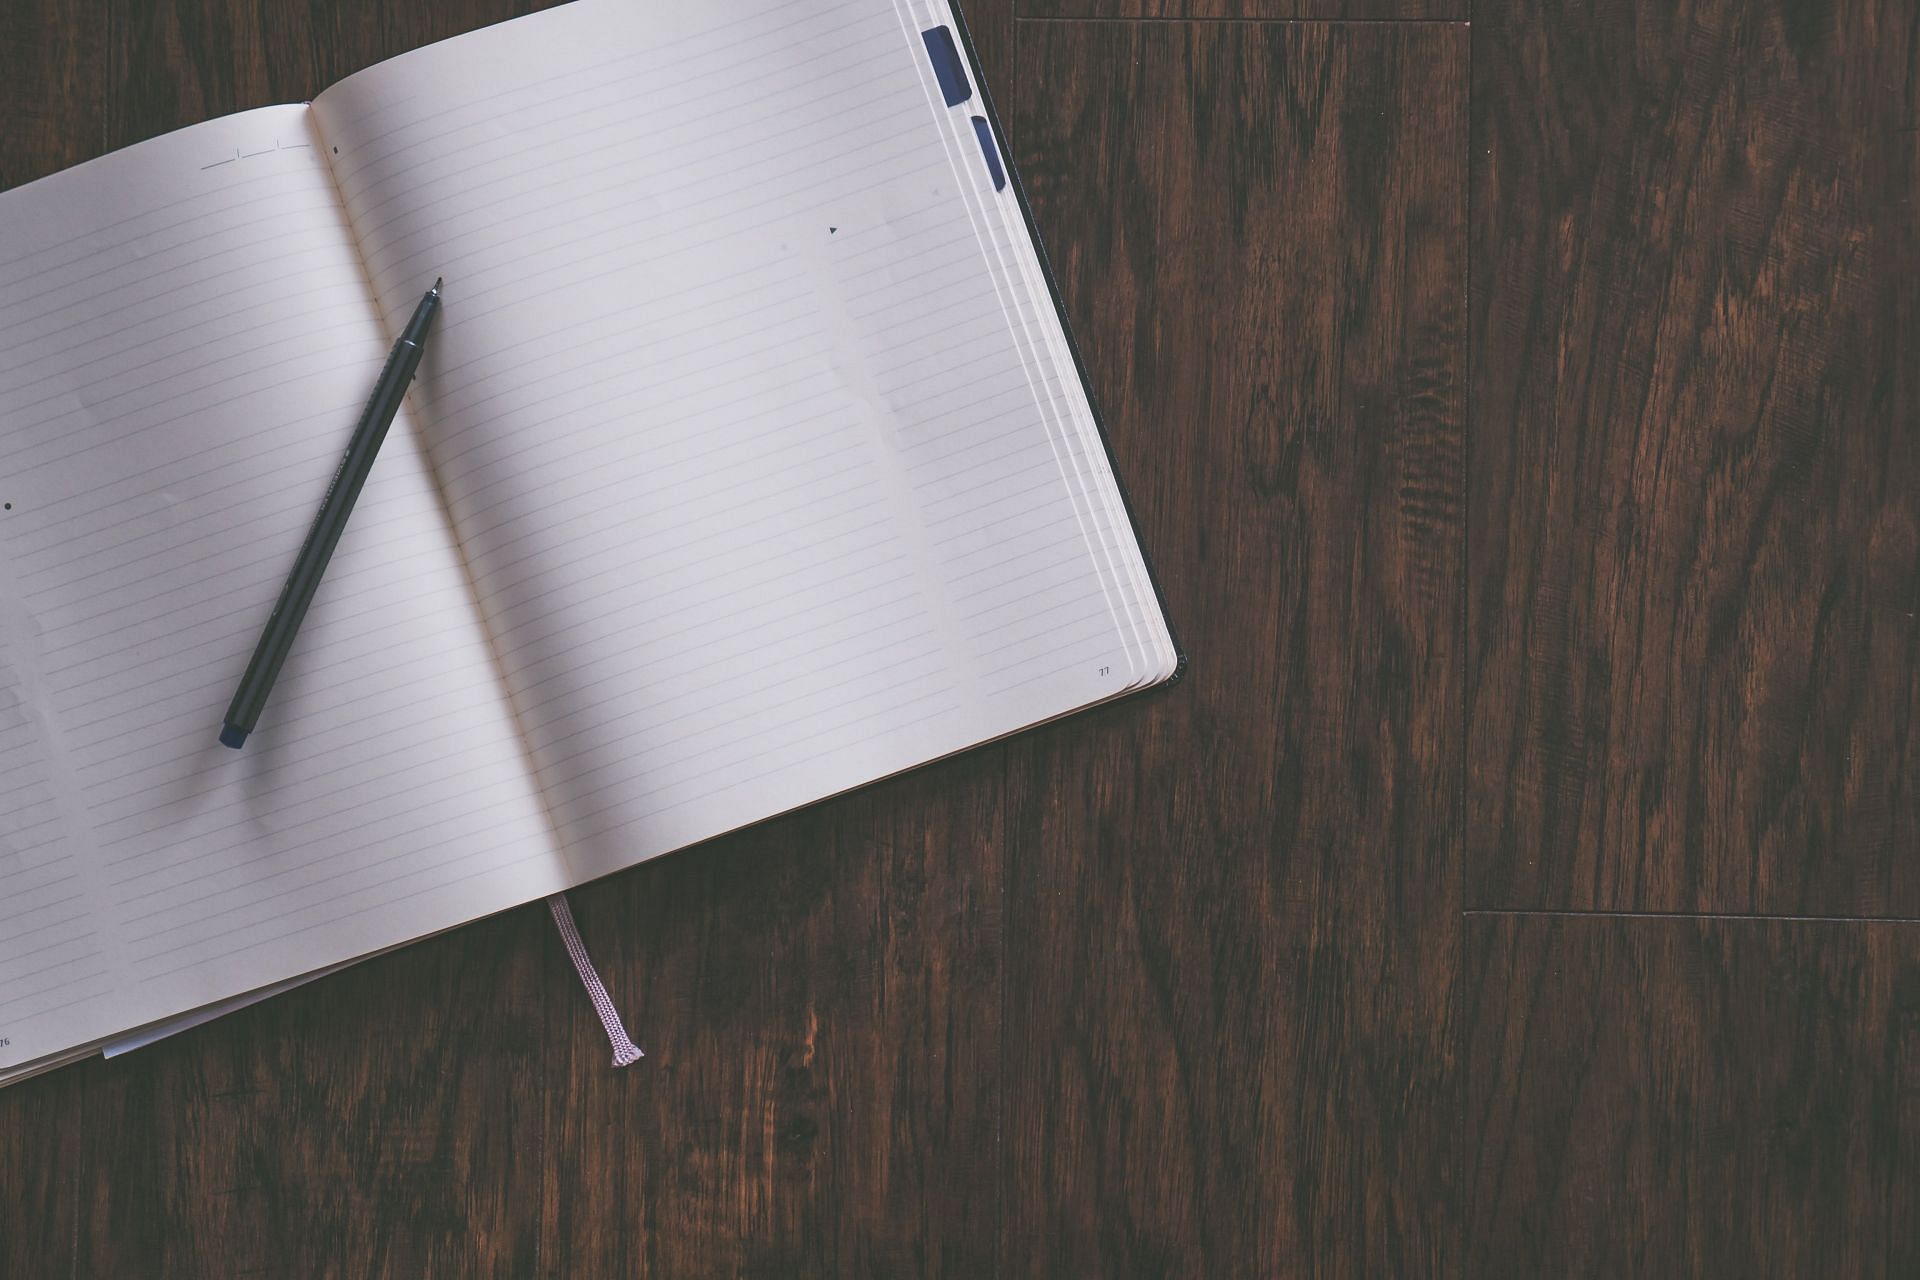 It may seem daunting to start, but journaling is a habit easy to get into. (Image via Pexels/Jessica Lewis Creative)